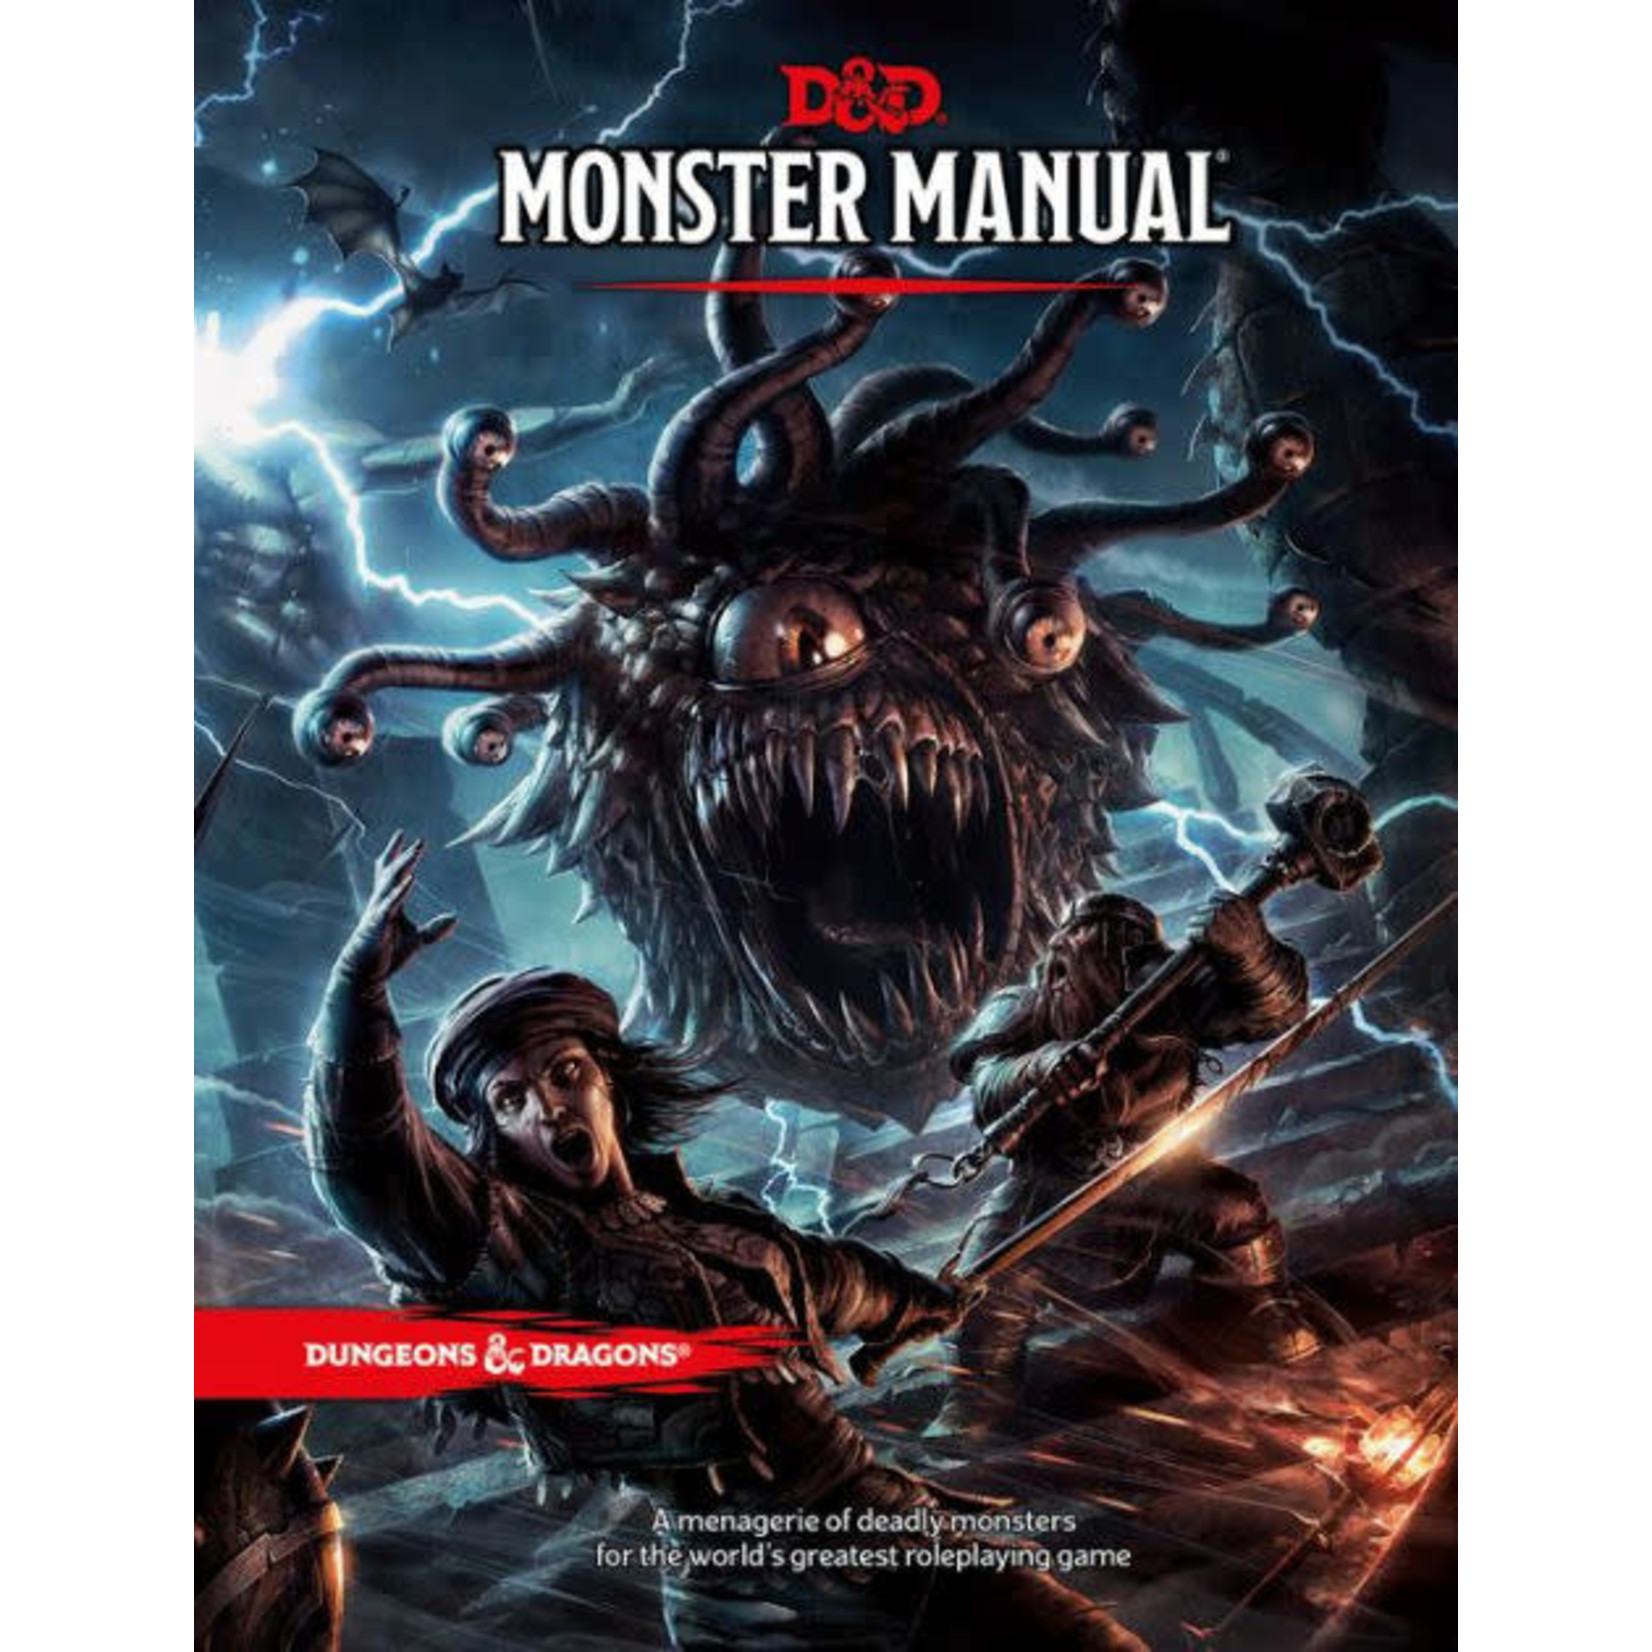 D&D Dungeons and Dragons RPG: Monster Manual